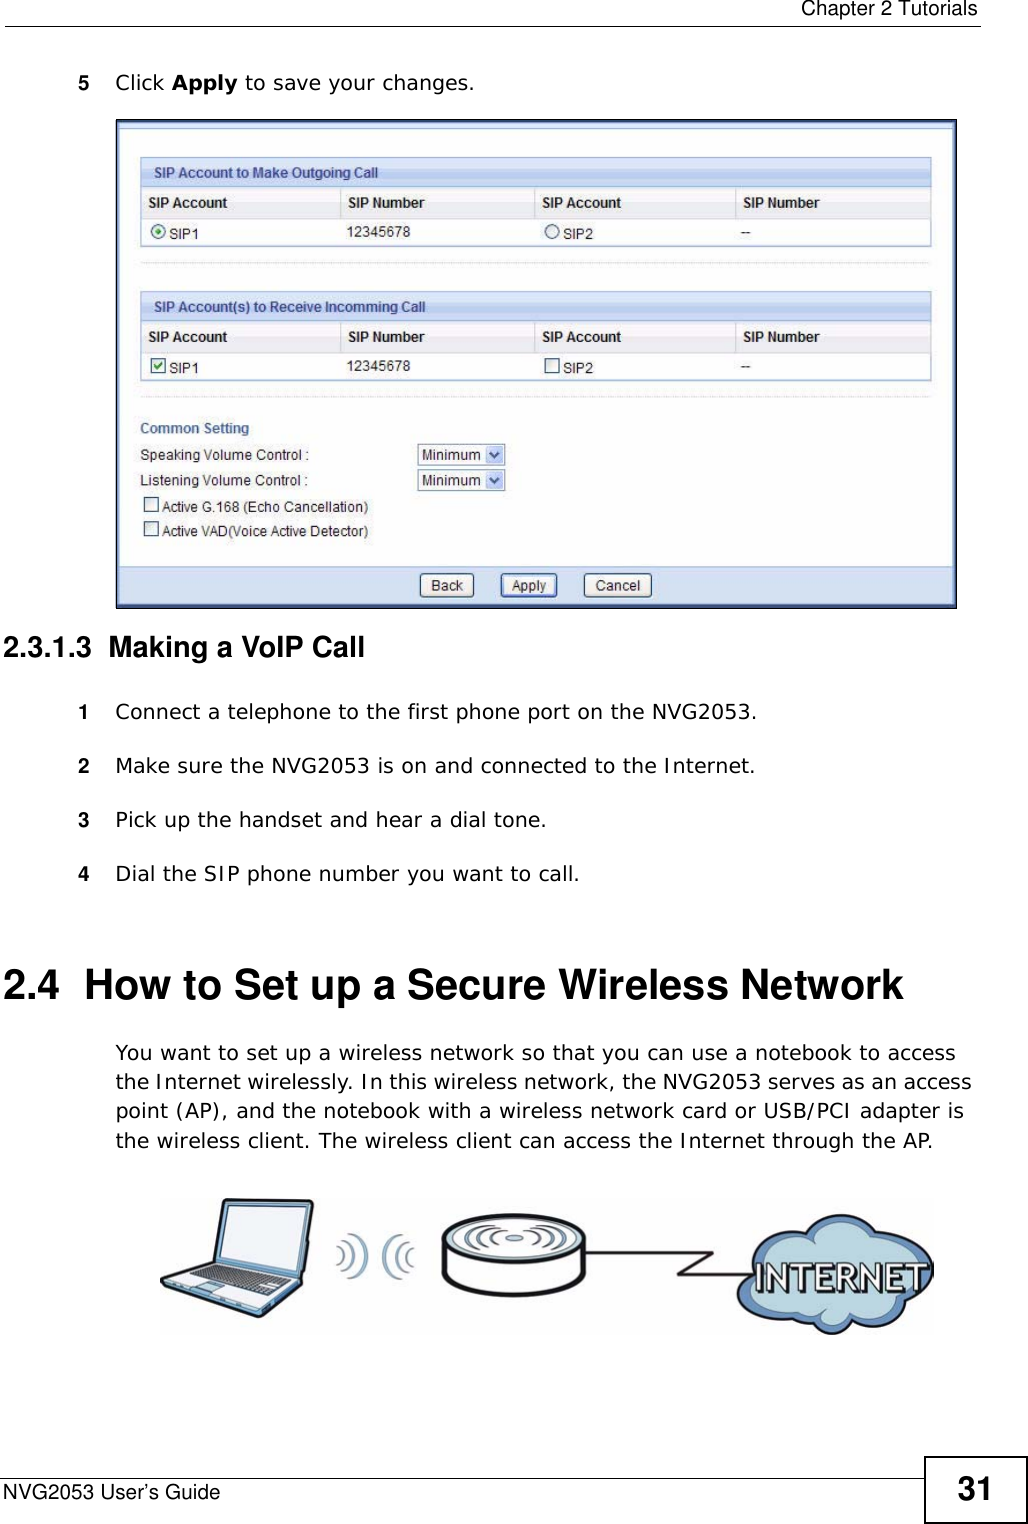  Chapter 2 TutorialsNVG2053 User’s Guide 315Click Apply to save your changes.2.3.1.3  Making a VoIP Call 1Connect a telephone to the first phone port on the NVG2053.2Make sure the NVG2053 is on and connected to the Internet.3Pick up the handset and hear a dial tone.4Dial the SIP phone number you want to call.2.4  How to Set up a Secure Wireless NetworkYou want to set up a wireless network so that you can use a notebook to access the Internet wirelessly. In this wireless network, the NVG2053 serves as an access point (AP), and the notebook with a wireless network card or USB/PCI adapter is the wireless client. The wireless client can access the Internet through the AP.